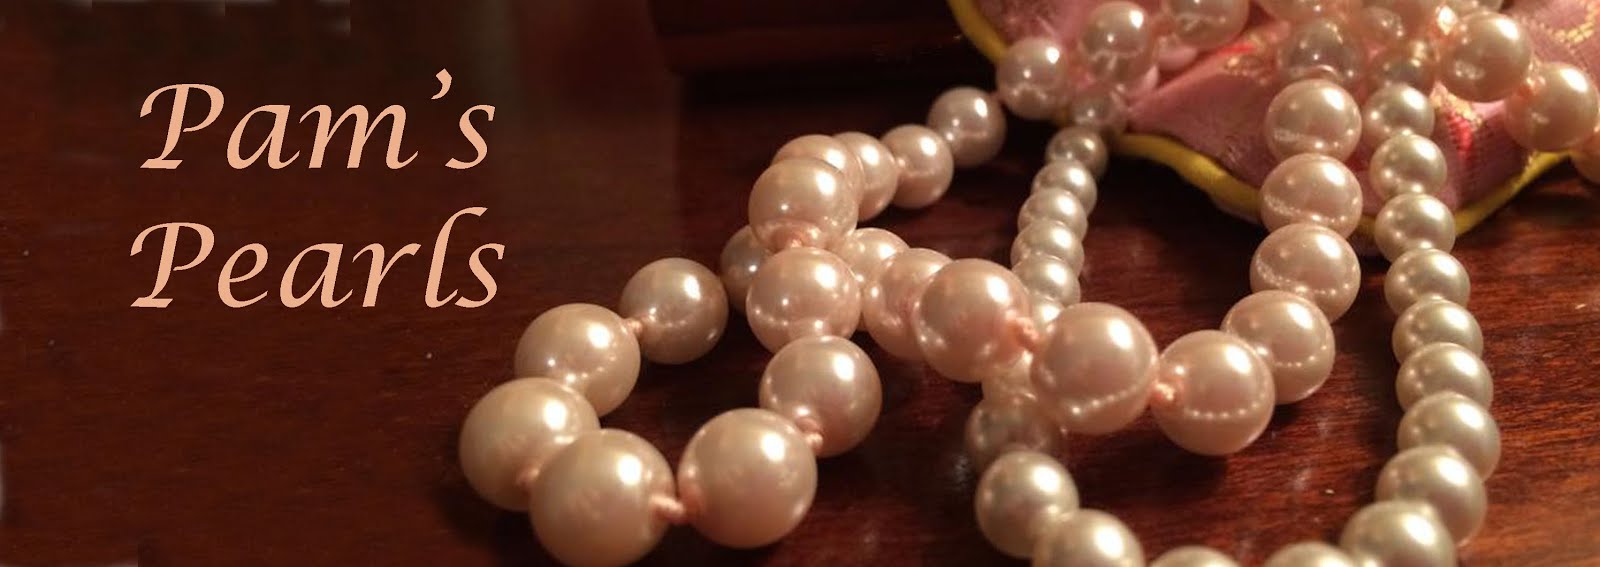 Pam's Pearls